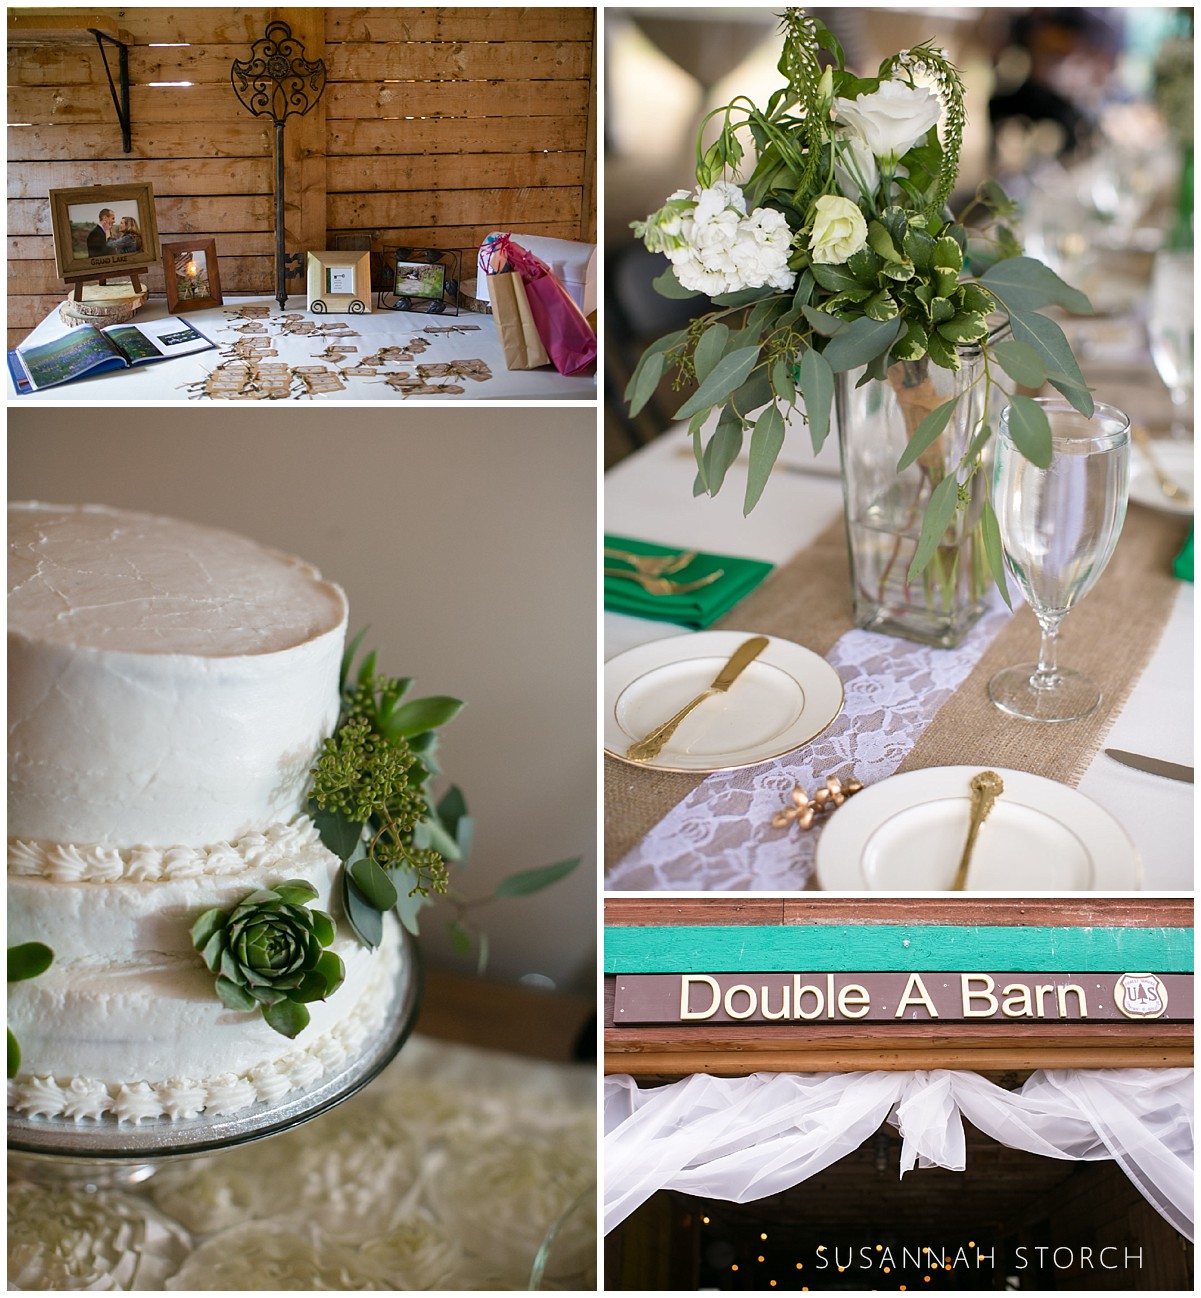 images of a wedding cake, table, sign, and gift table